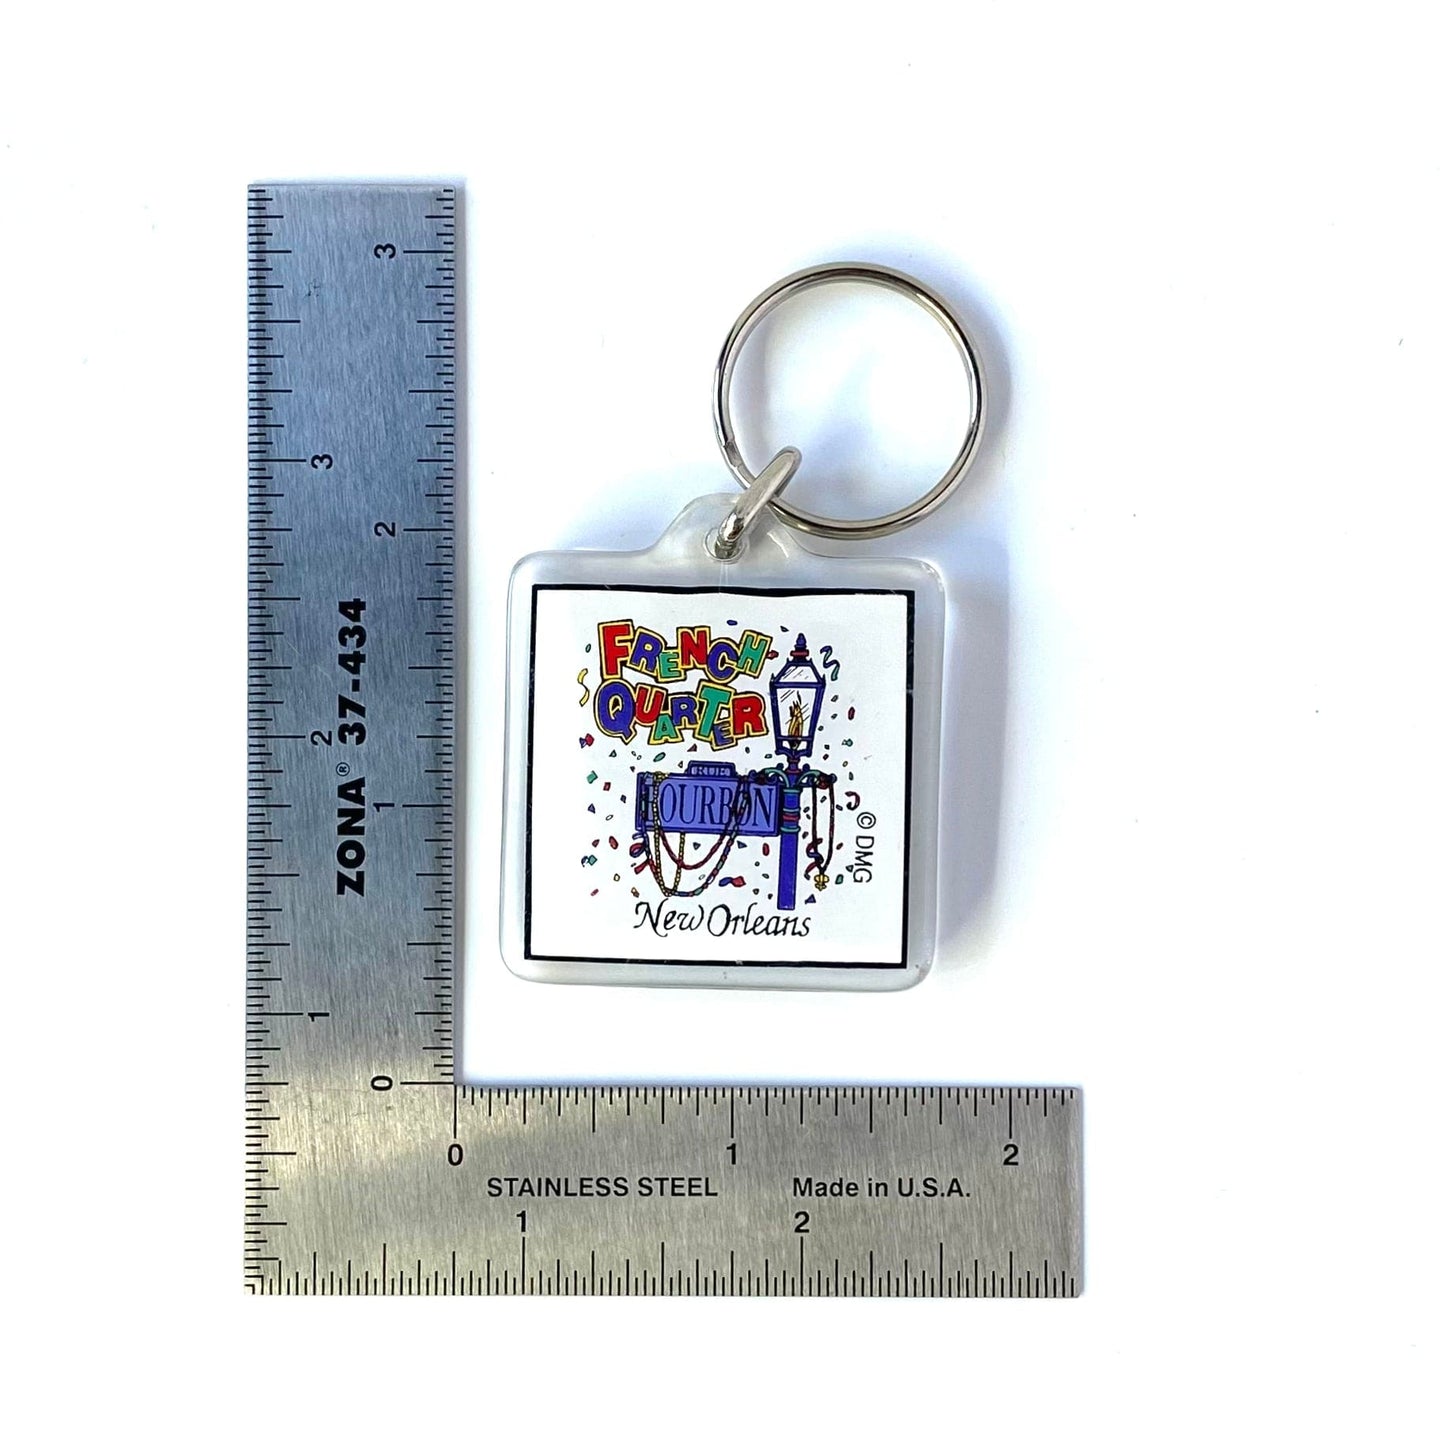 “French Quarter New Orleans Bourbon St.” Travel Souvenir Keychain Key Ring Square Clear Acrylic